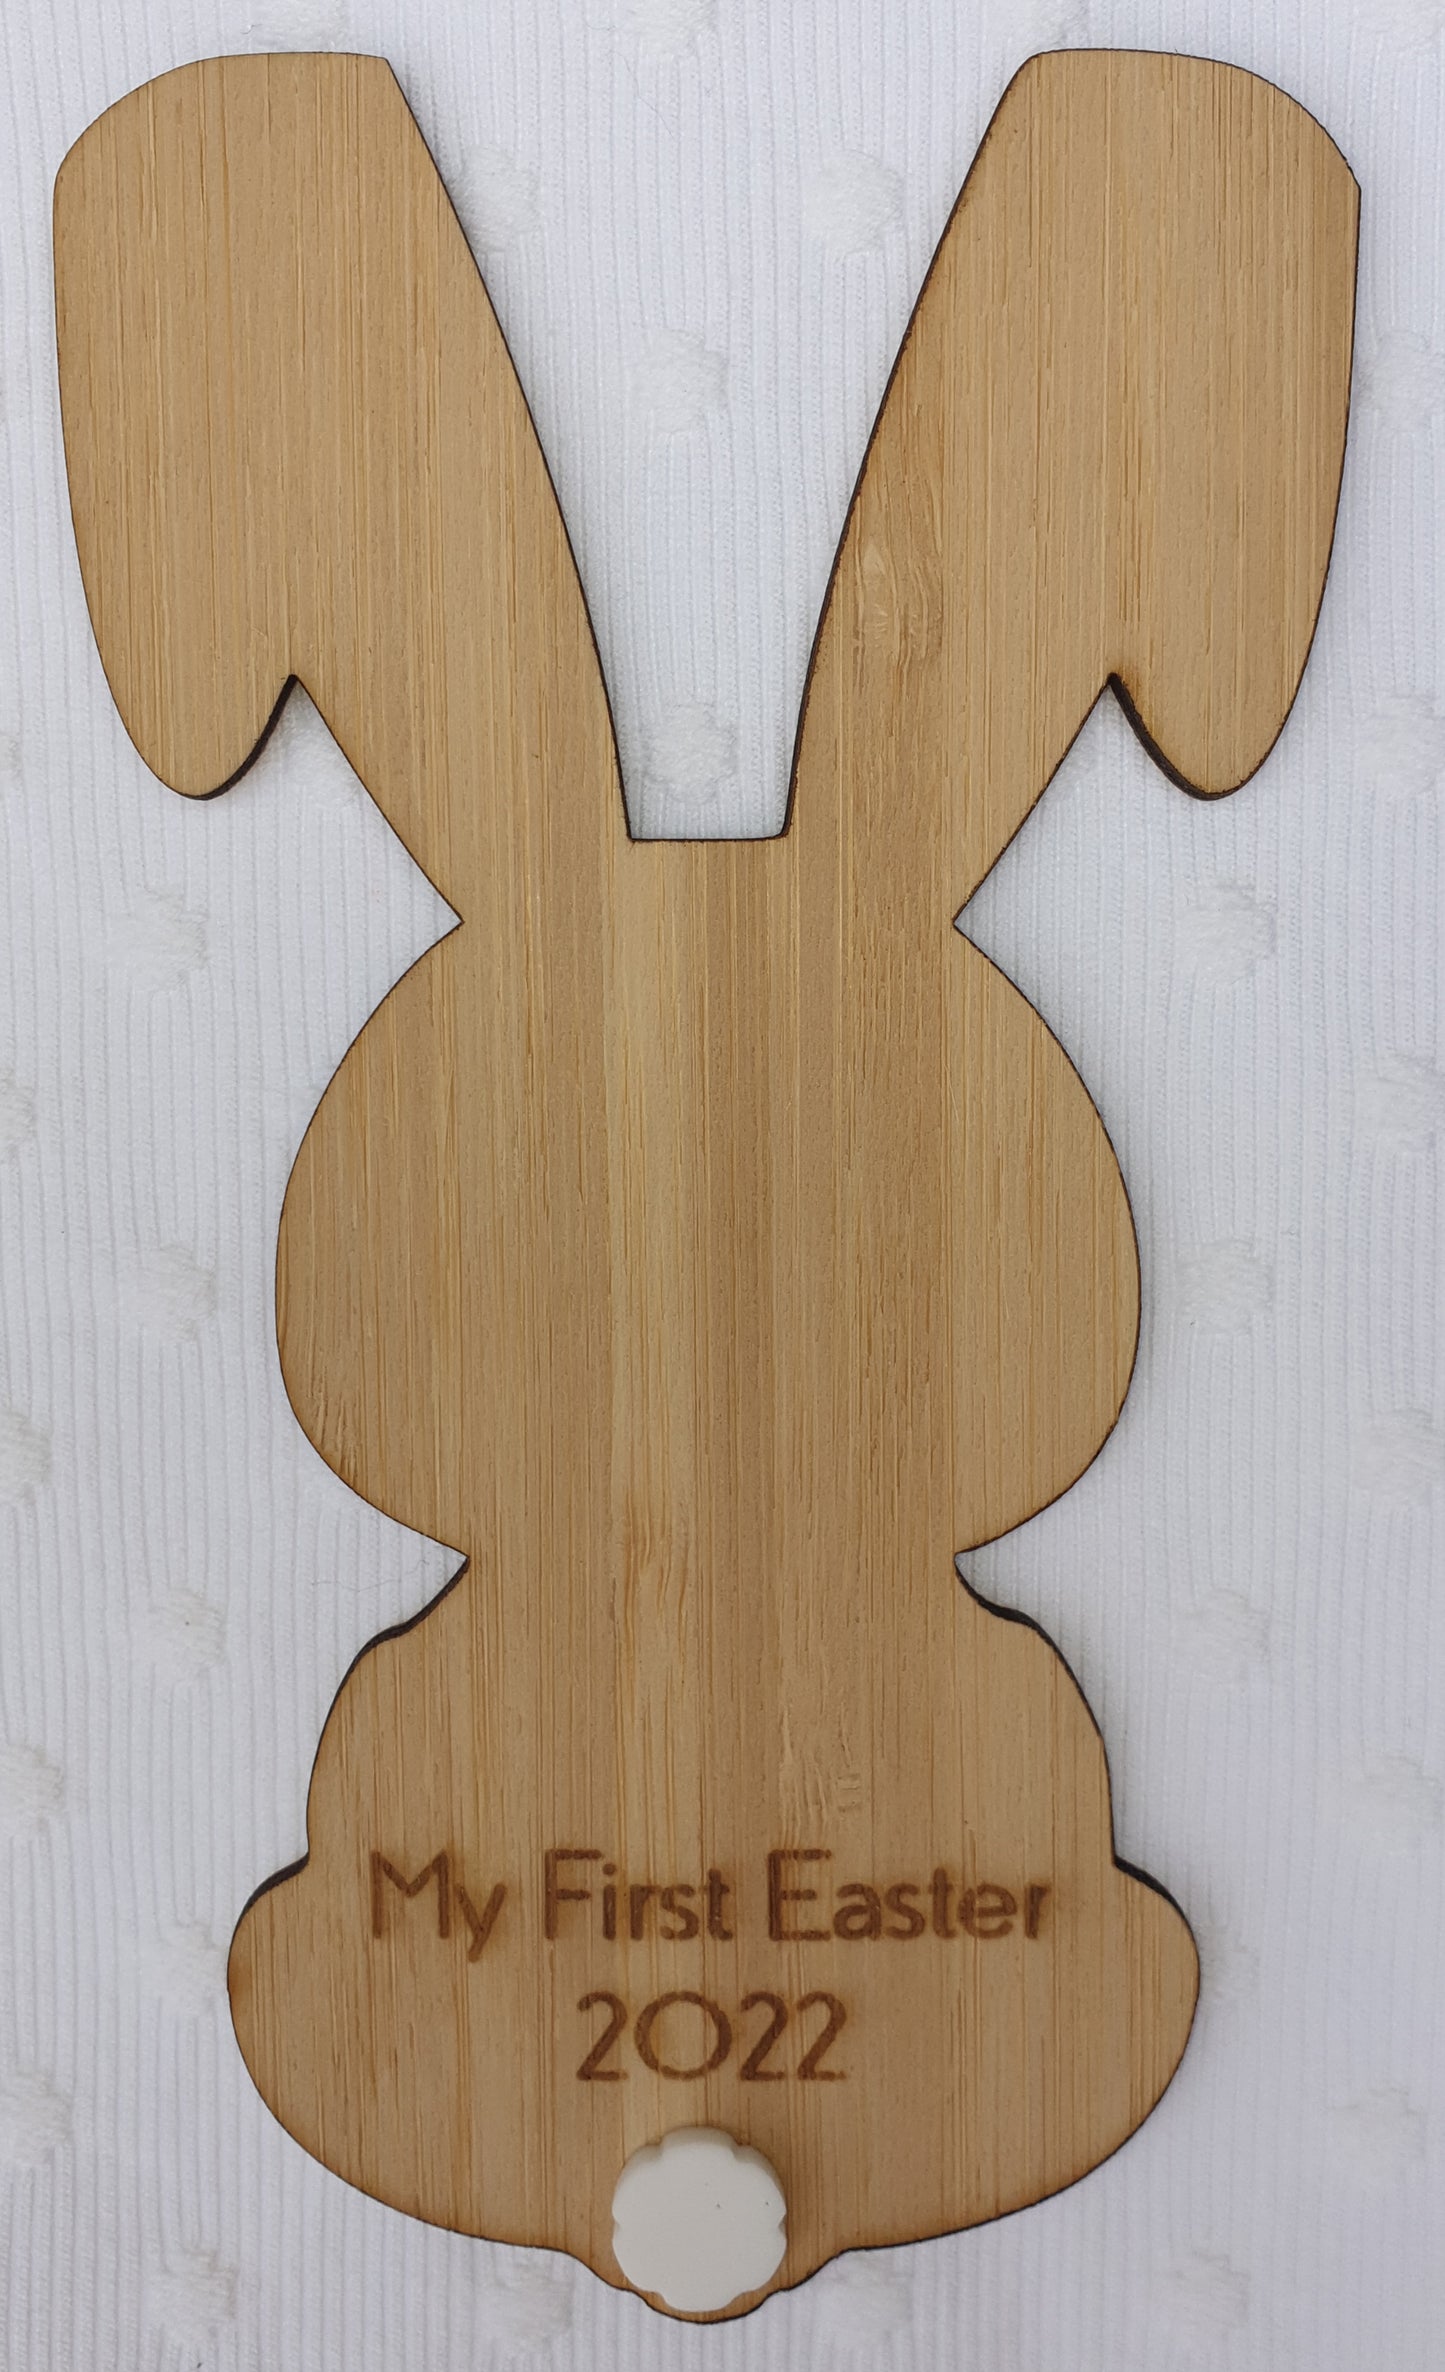 My First Easter - Milestone Bunny Plaque